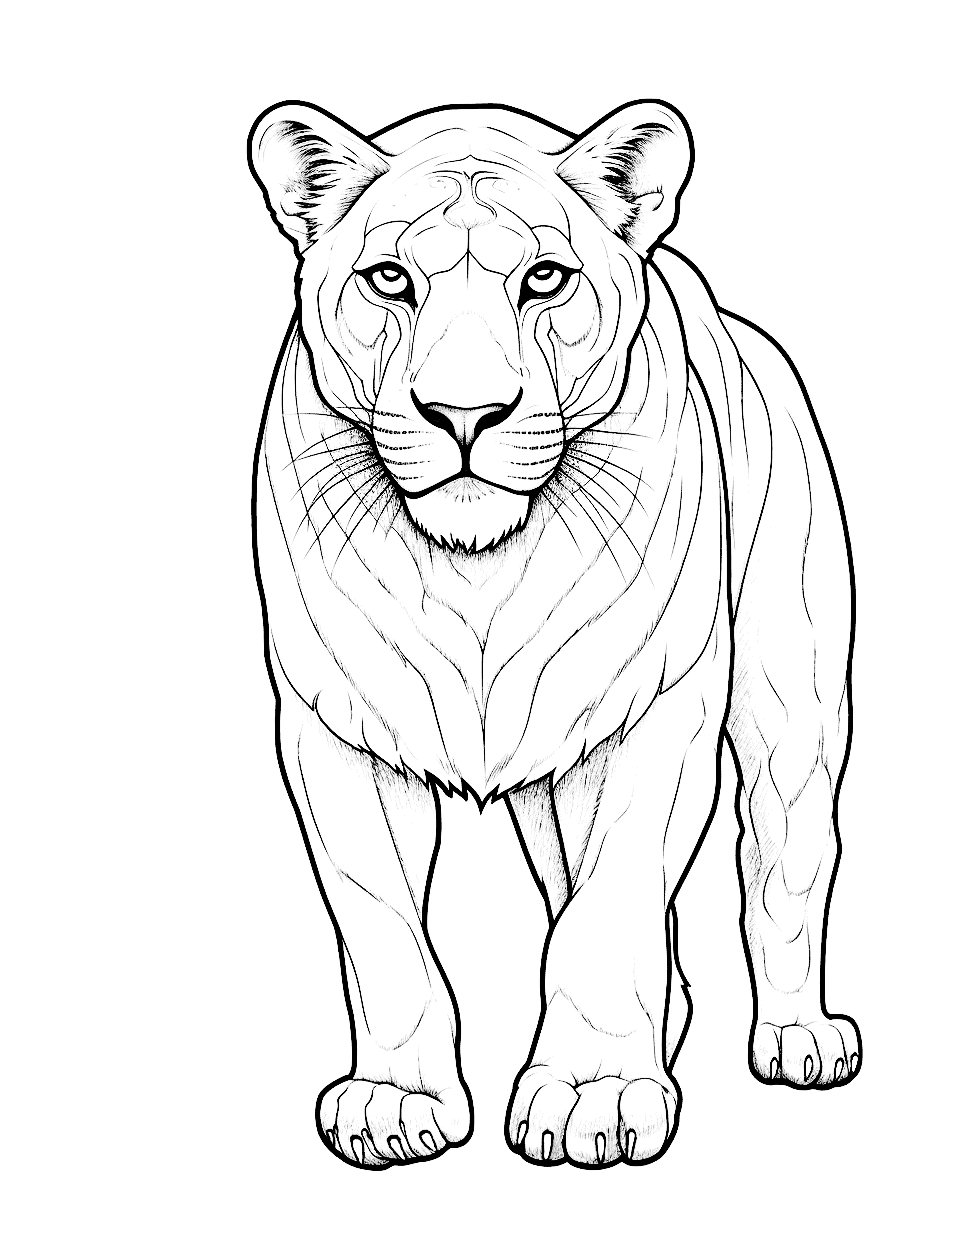 Majestic Lioness Animal Coloring Page - A lioness with a fierce gaze, protecting her pride.